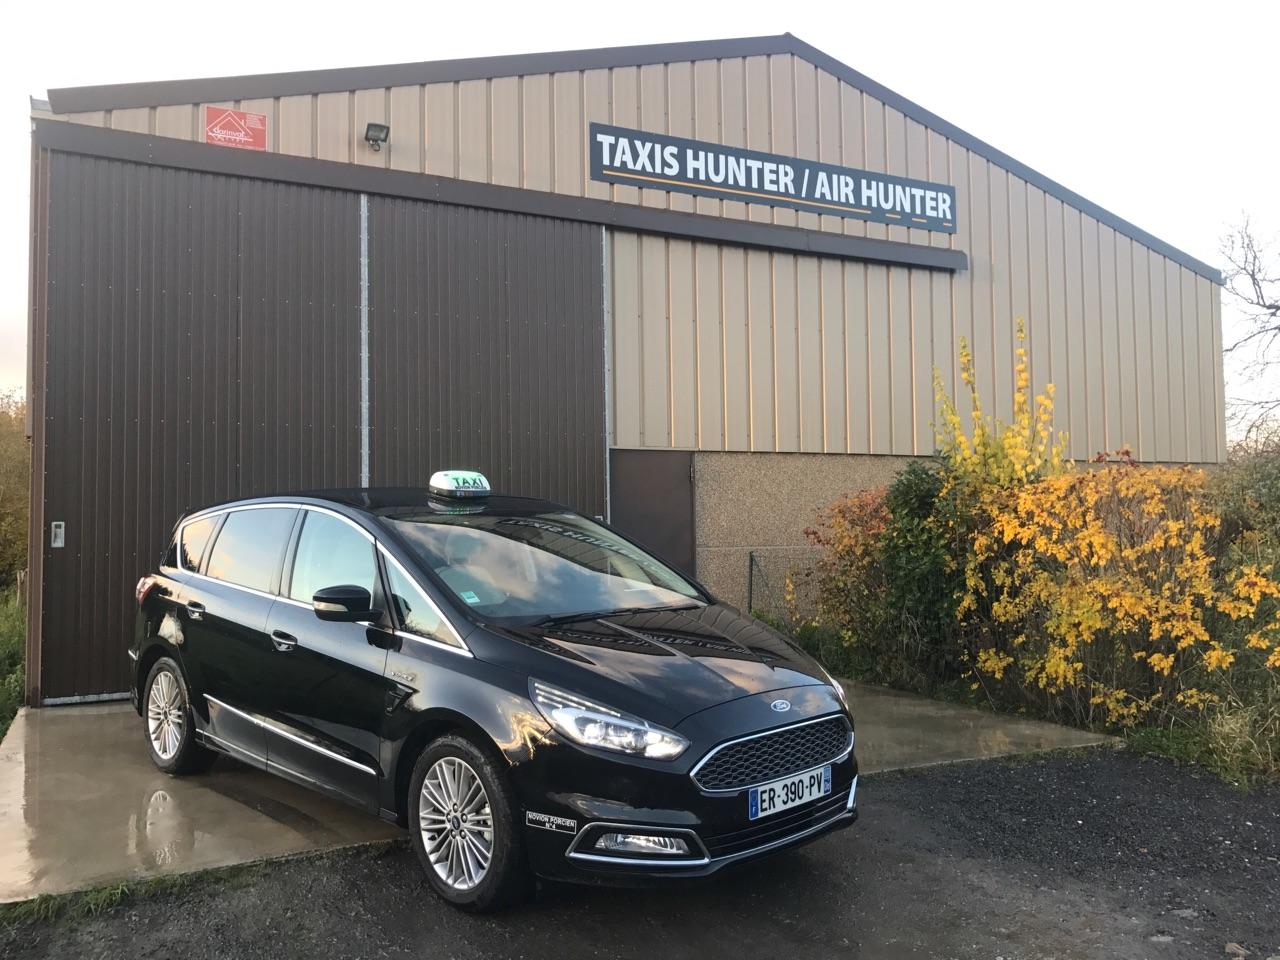 Taxis Hunter Air Hunter Ford noire